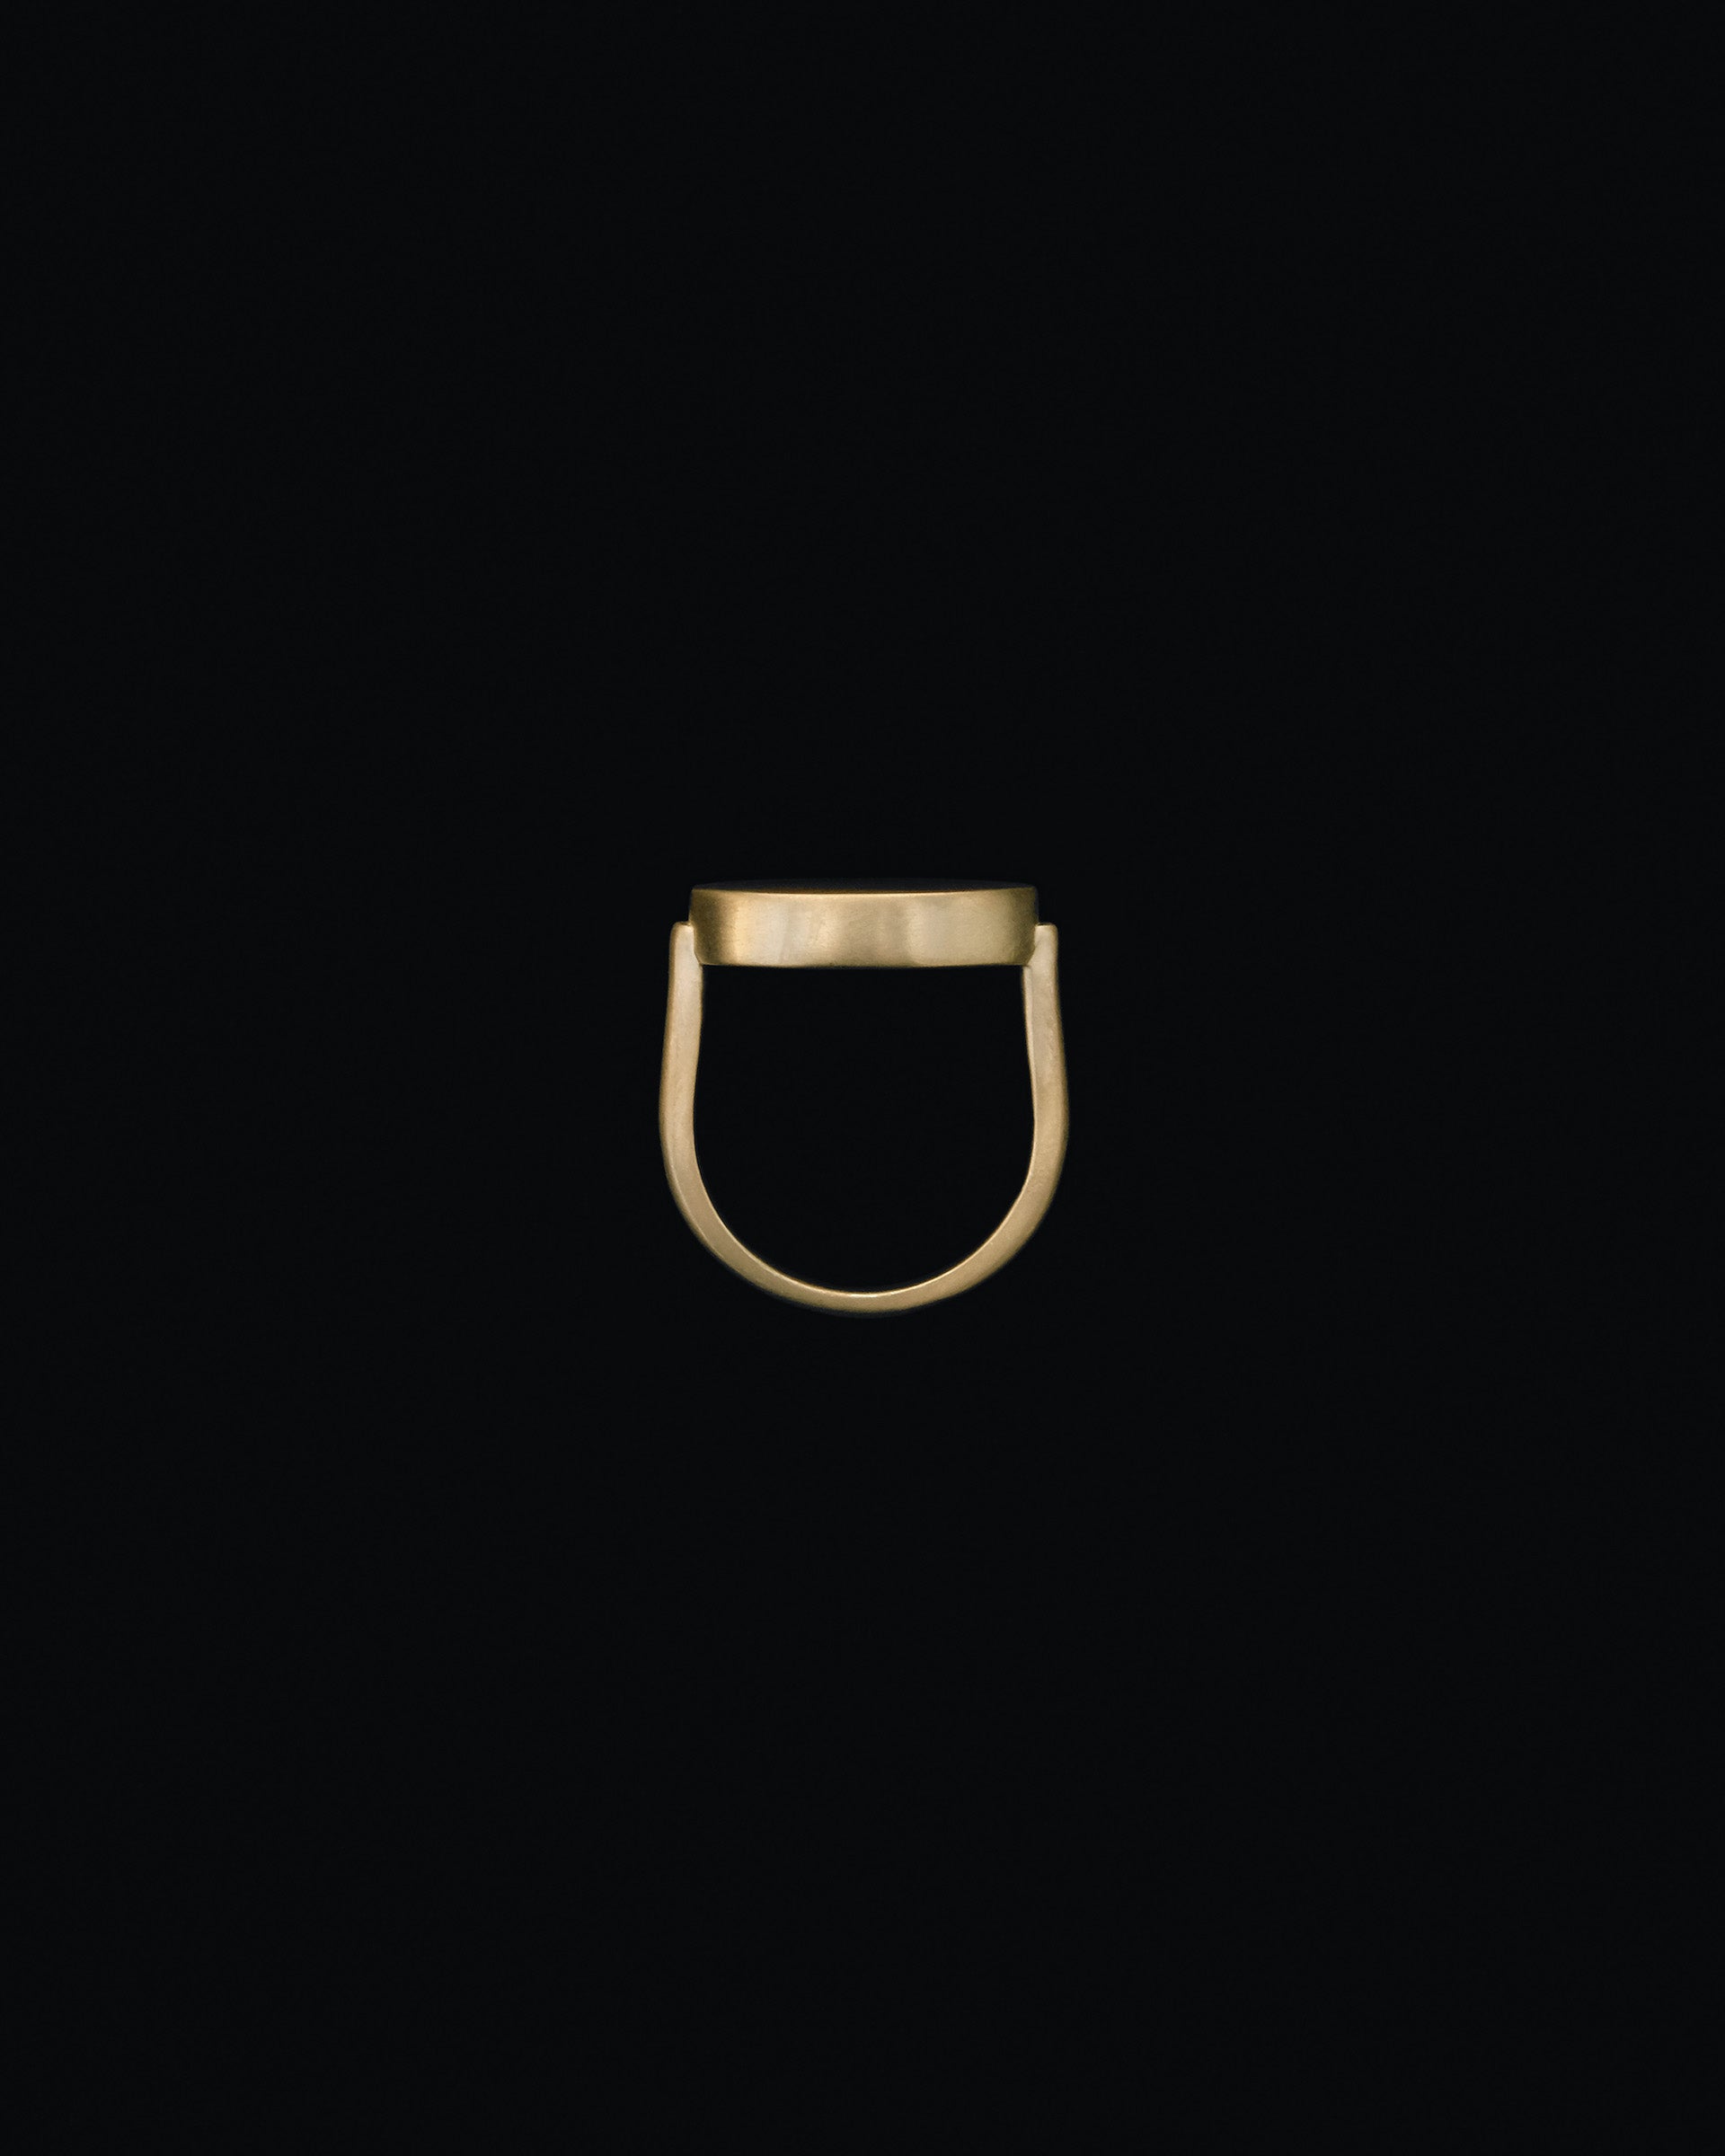 Tiana Marie Combes Stirrup Signet in 14k Yellow Gold.